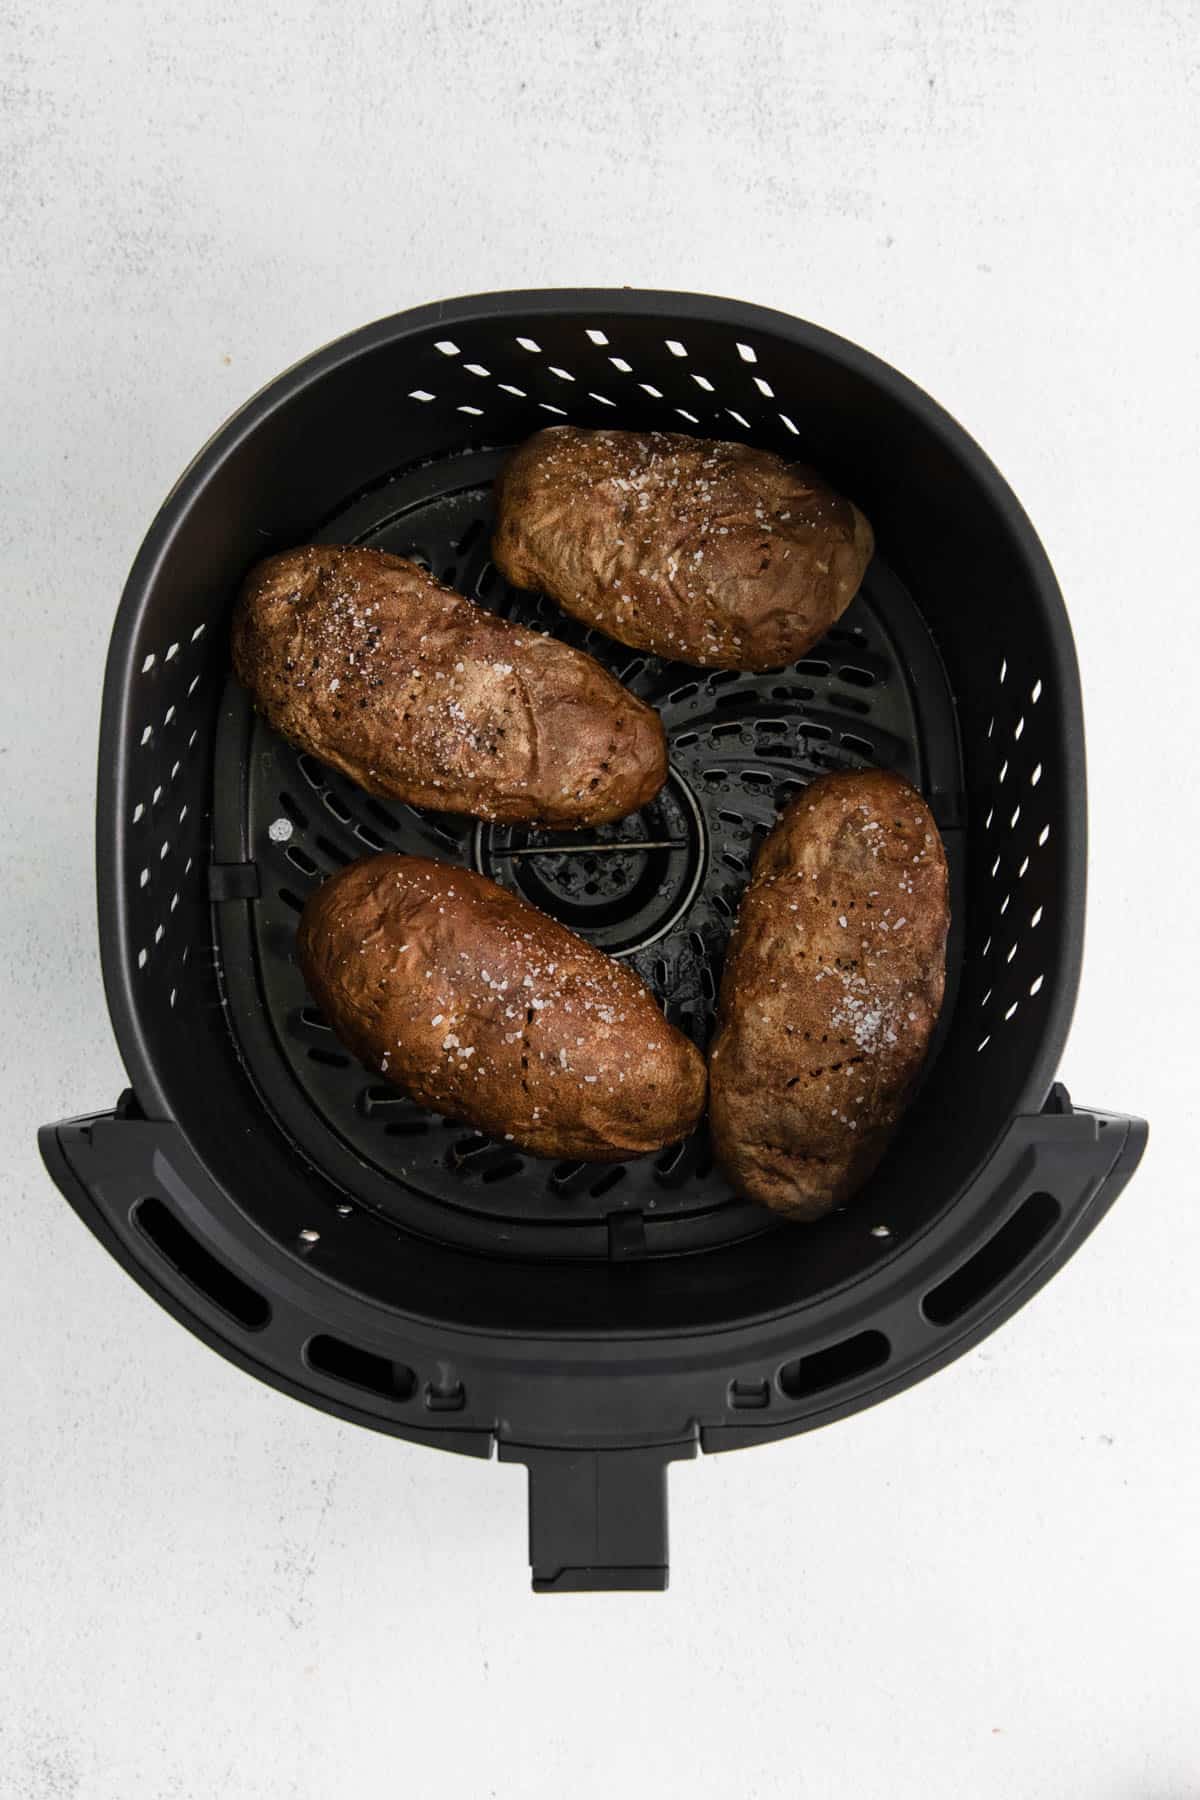 Four baked potatoes in the air fryer after being baked.